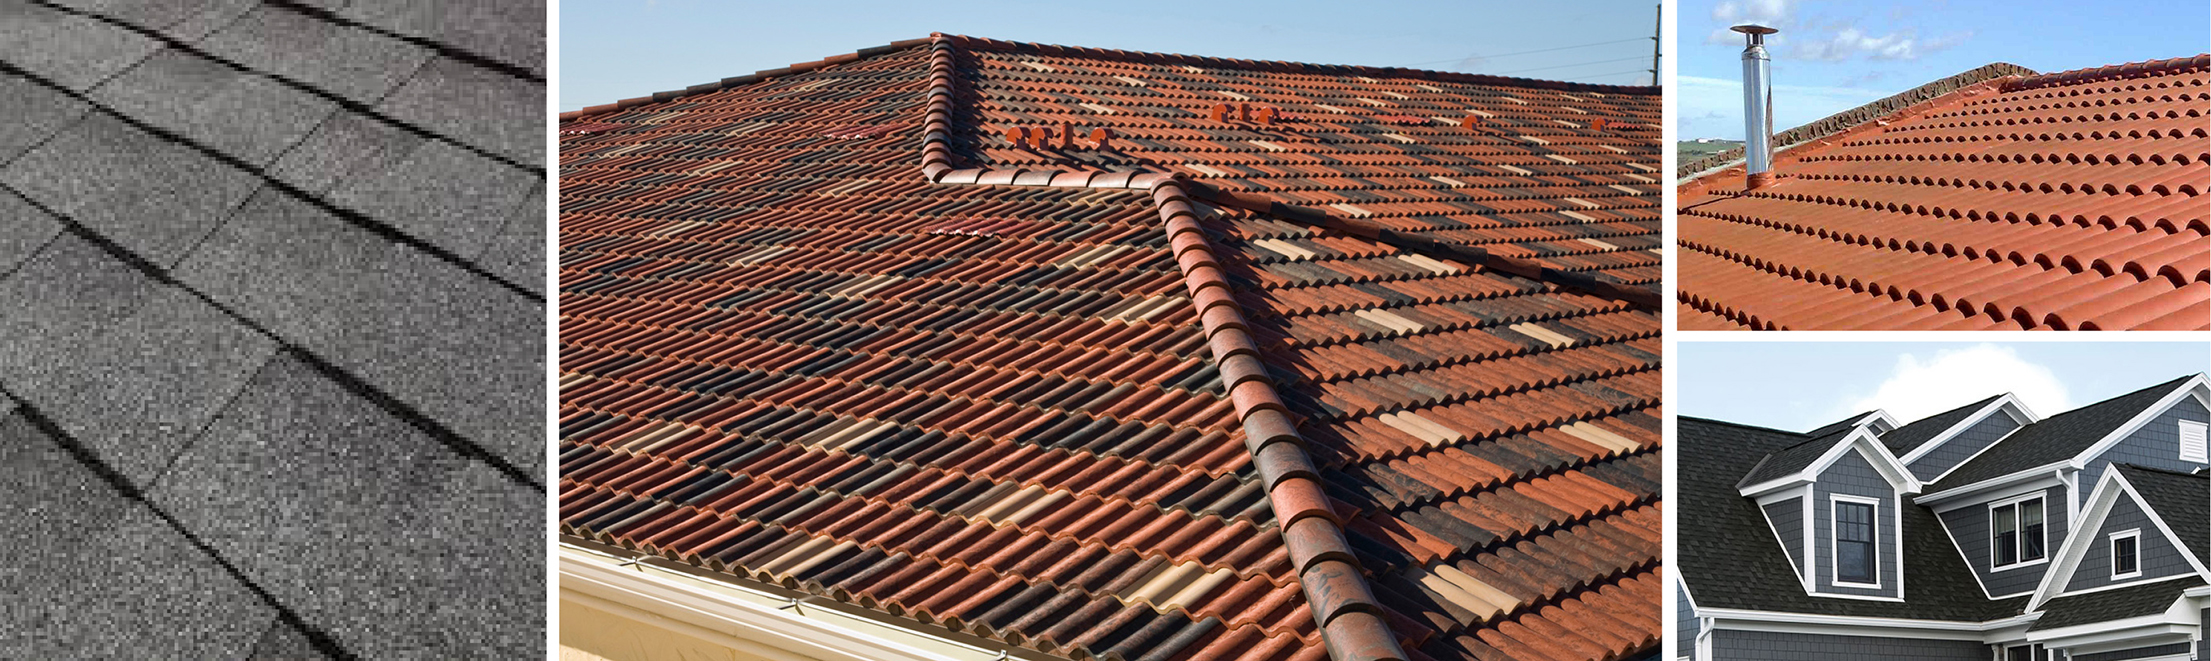 A&B Roofing is one of the best!